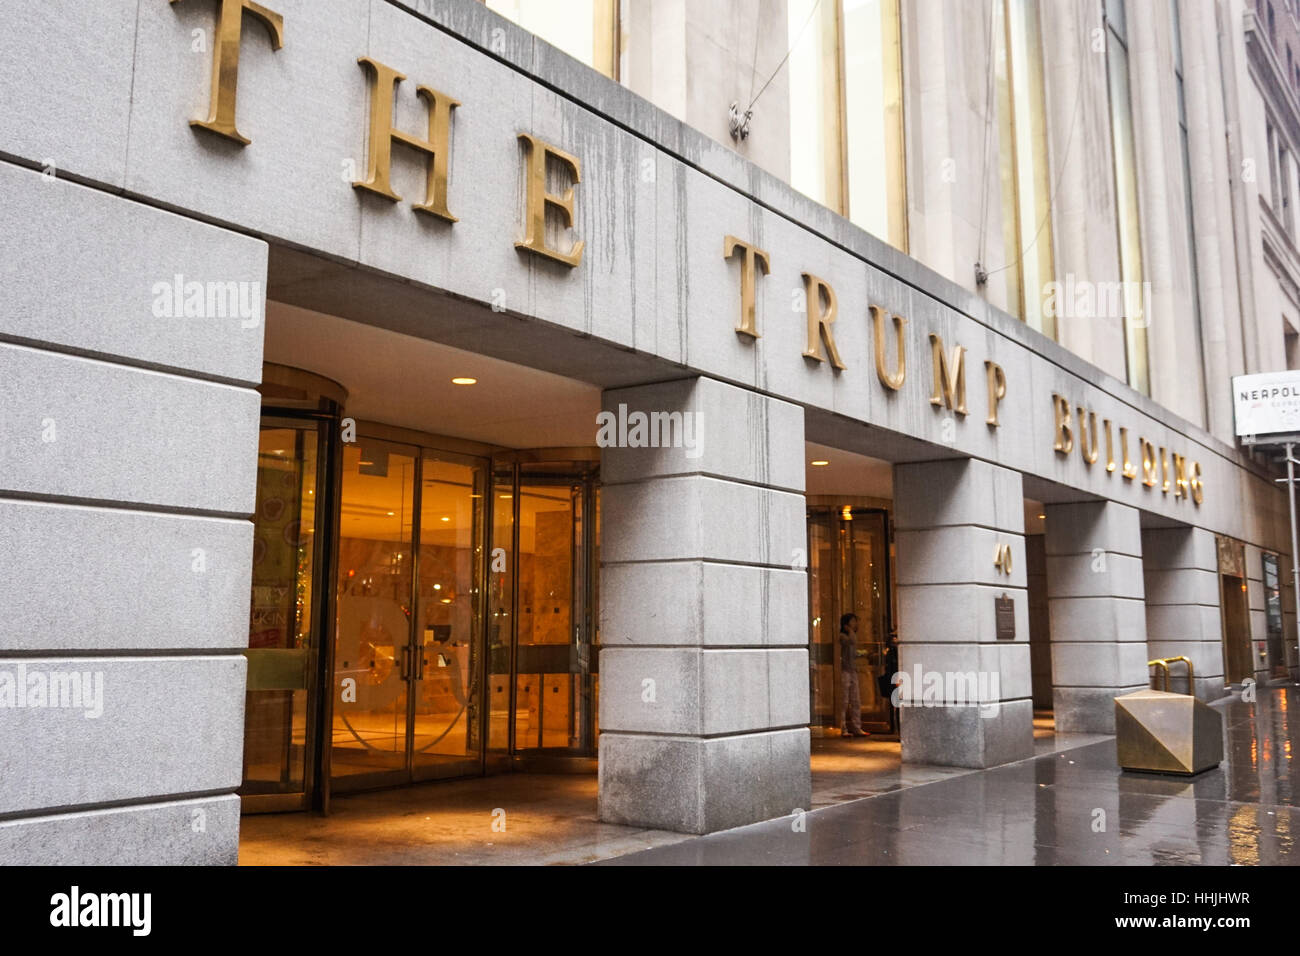 The exterior of the Trump Building at 40 Wall Street, New York City, USA Stock Photo